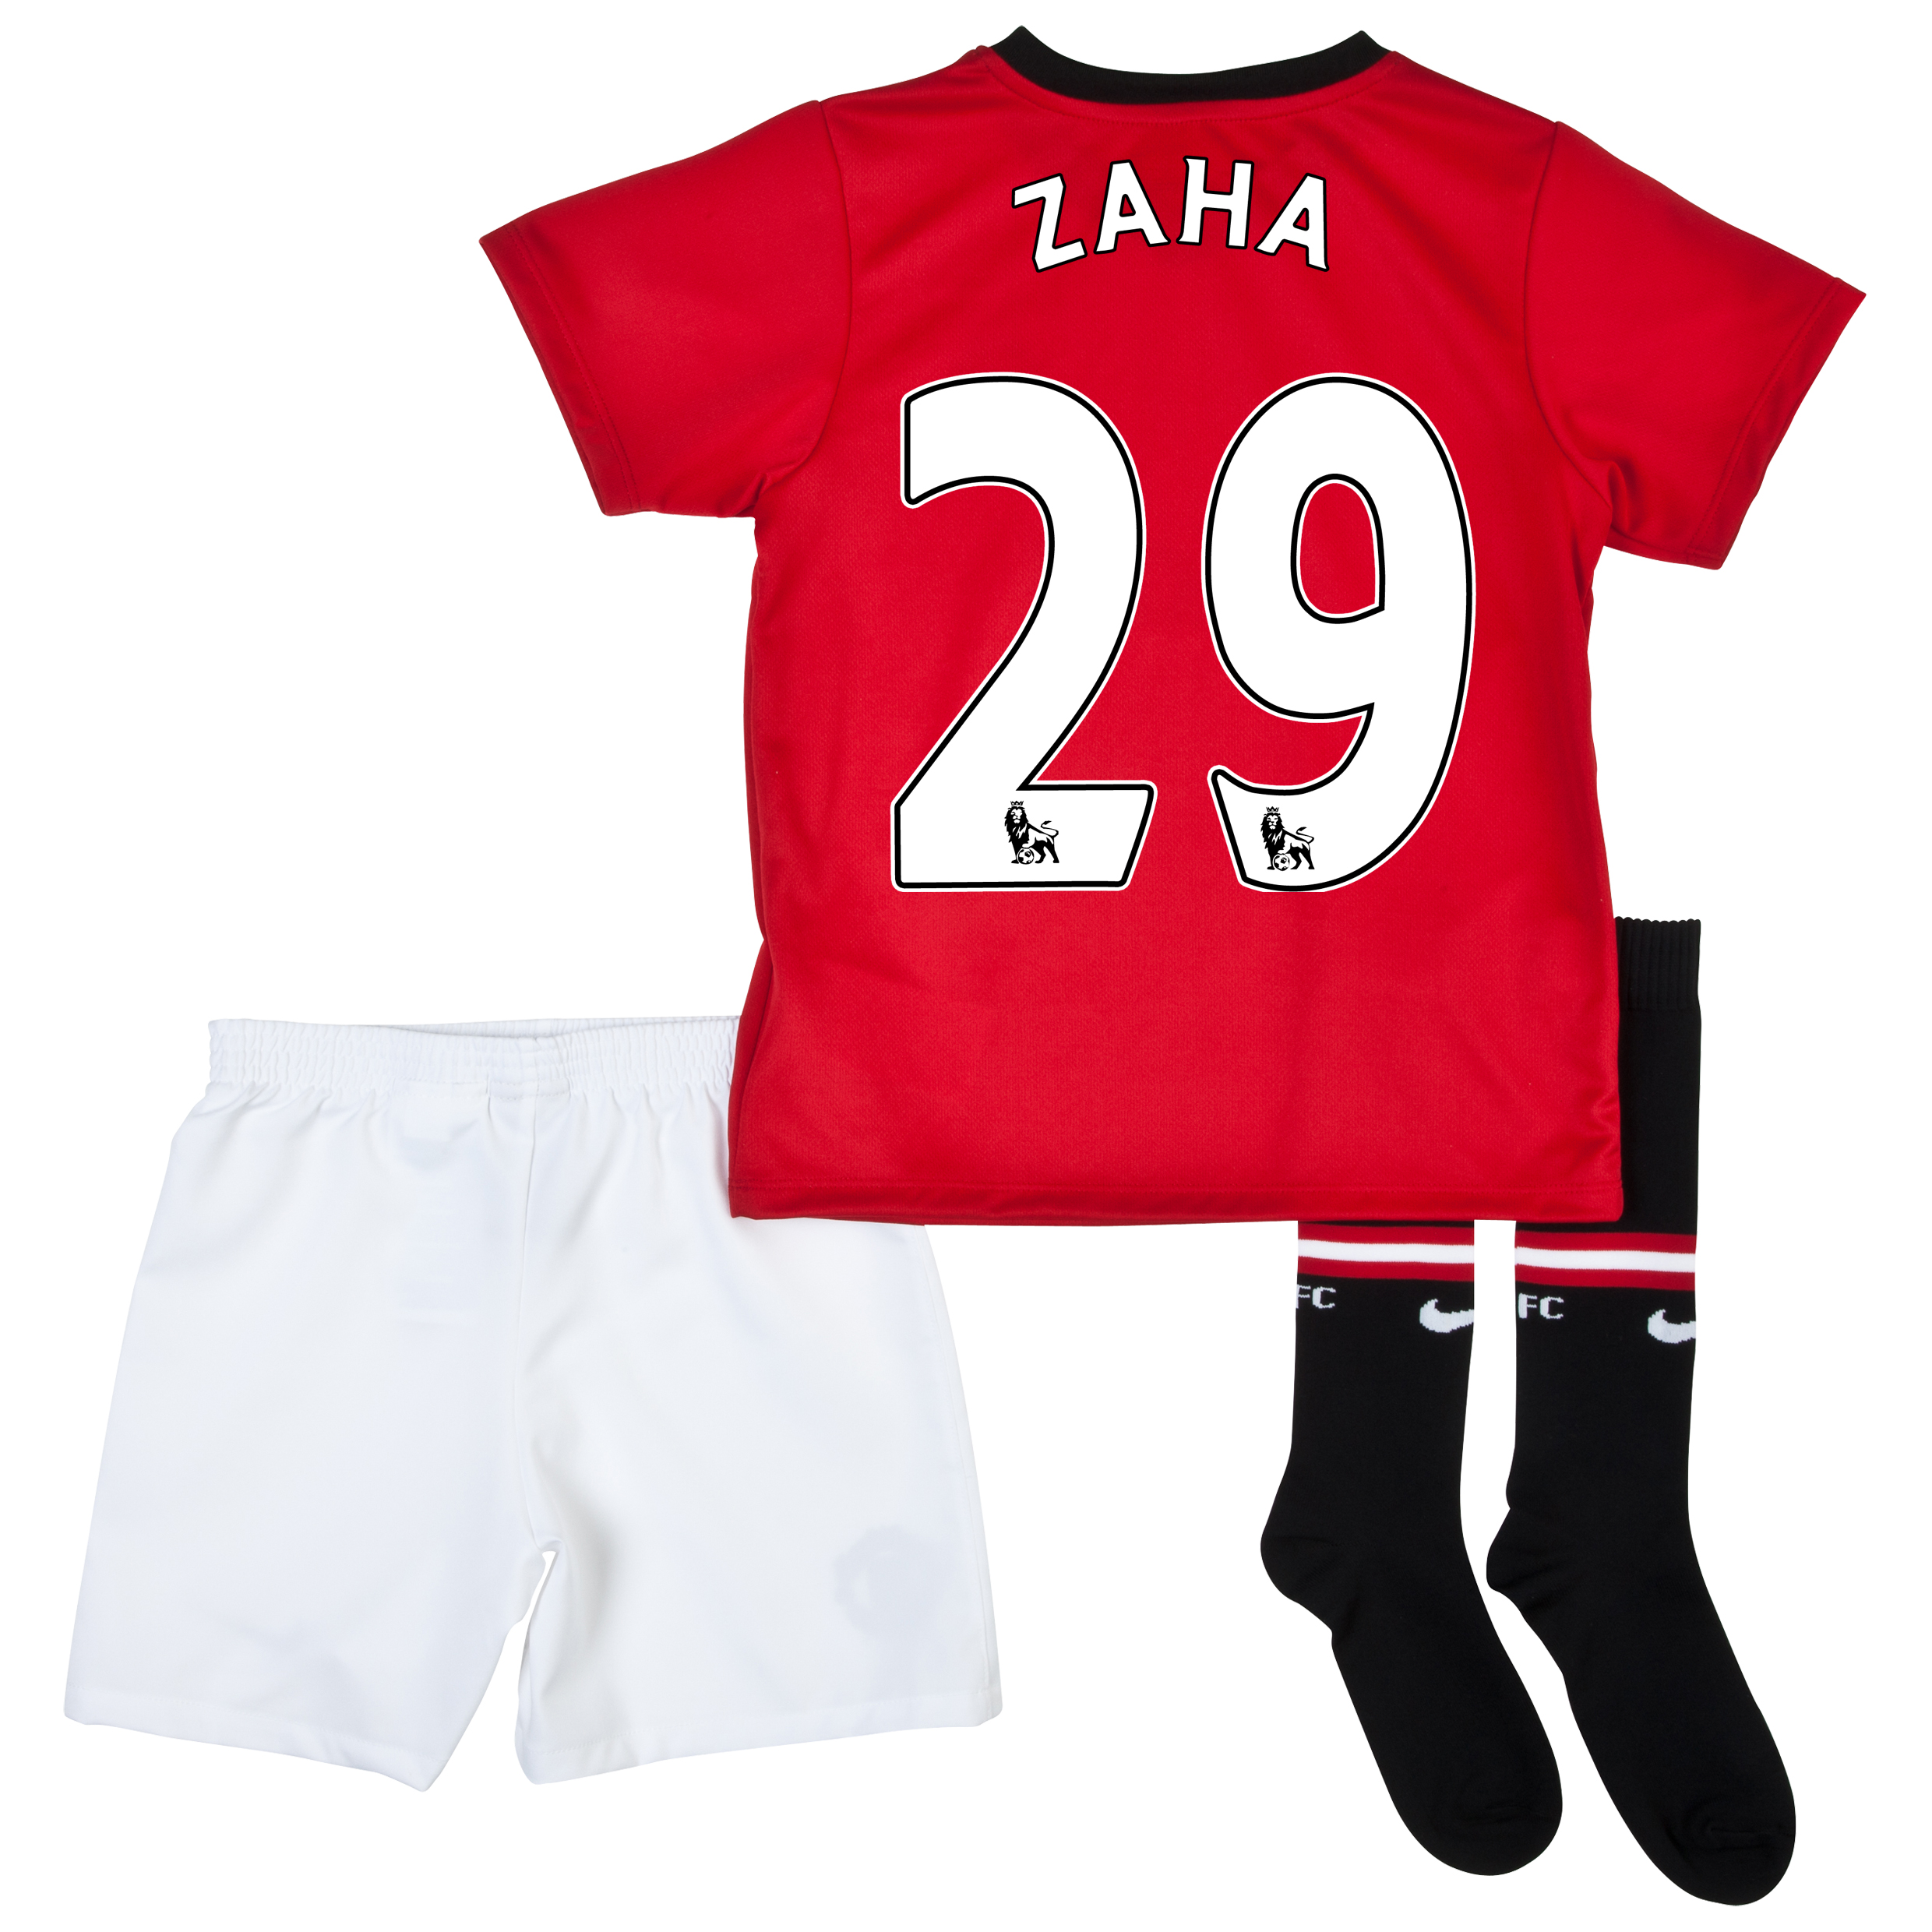 Manchester United Home Kit 2013/14 - Little Boys with Zaha 29 printing